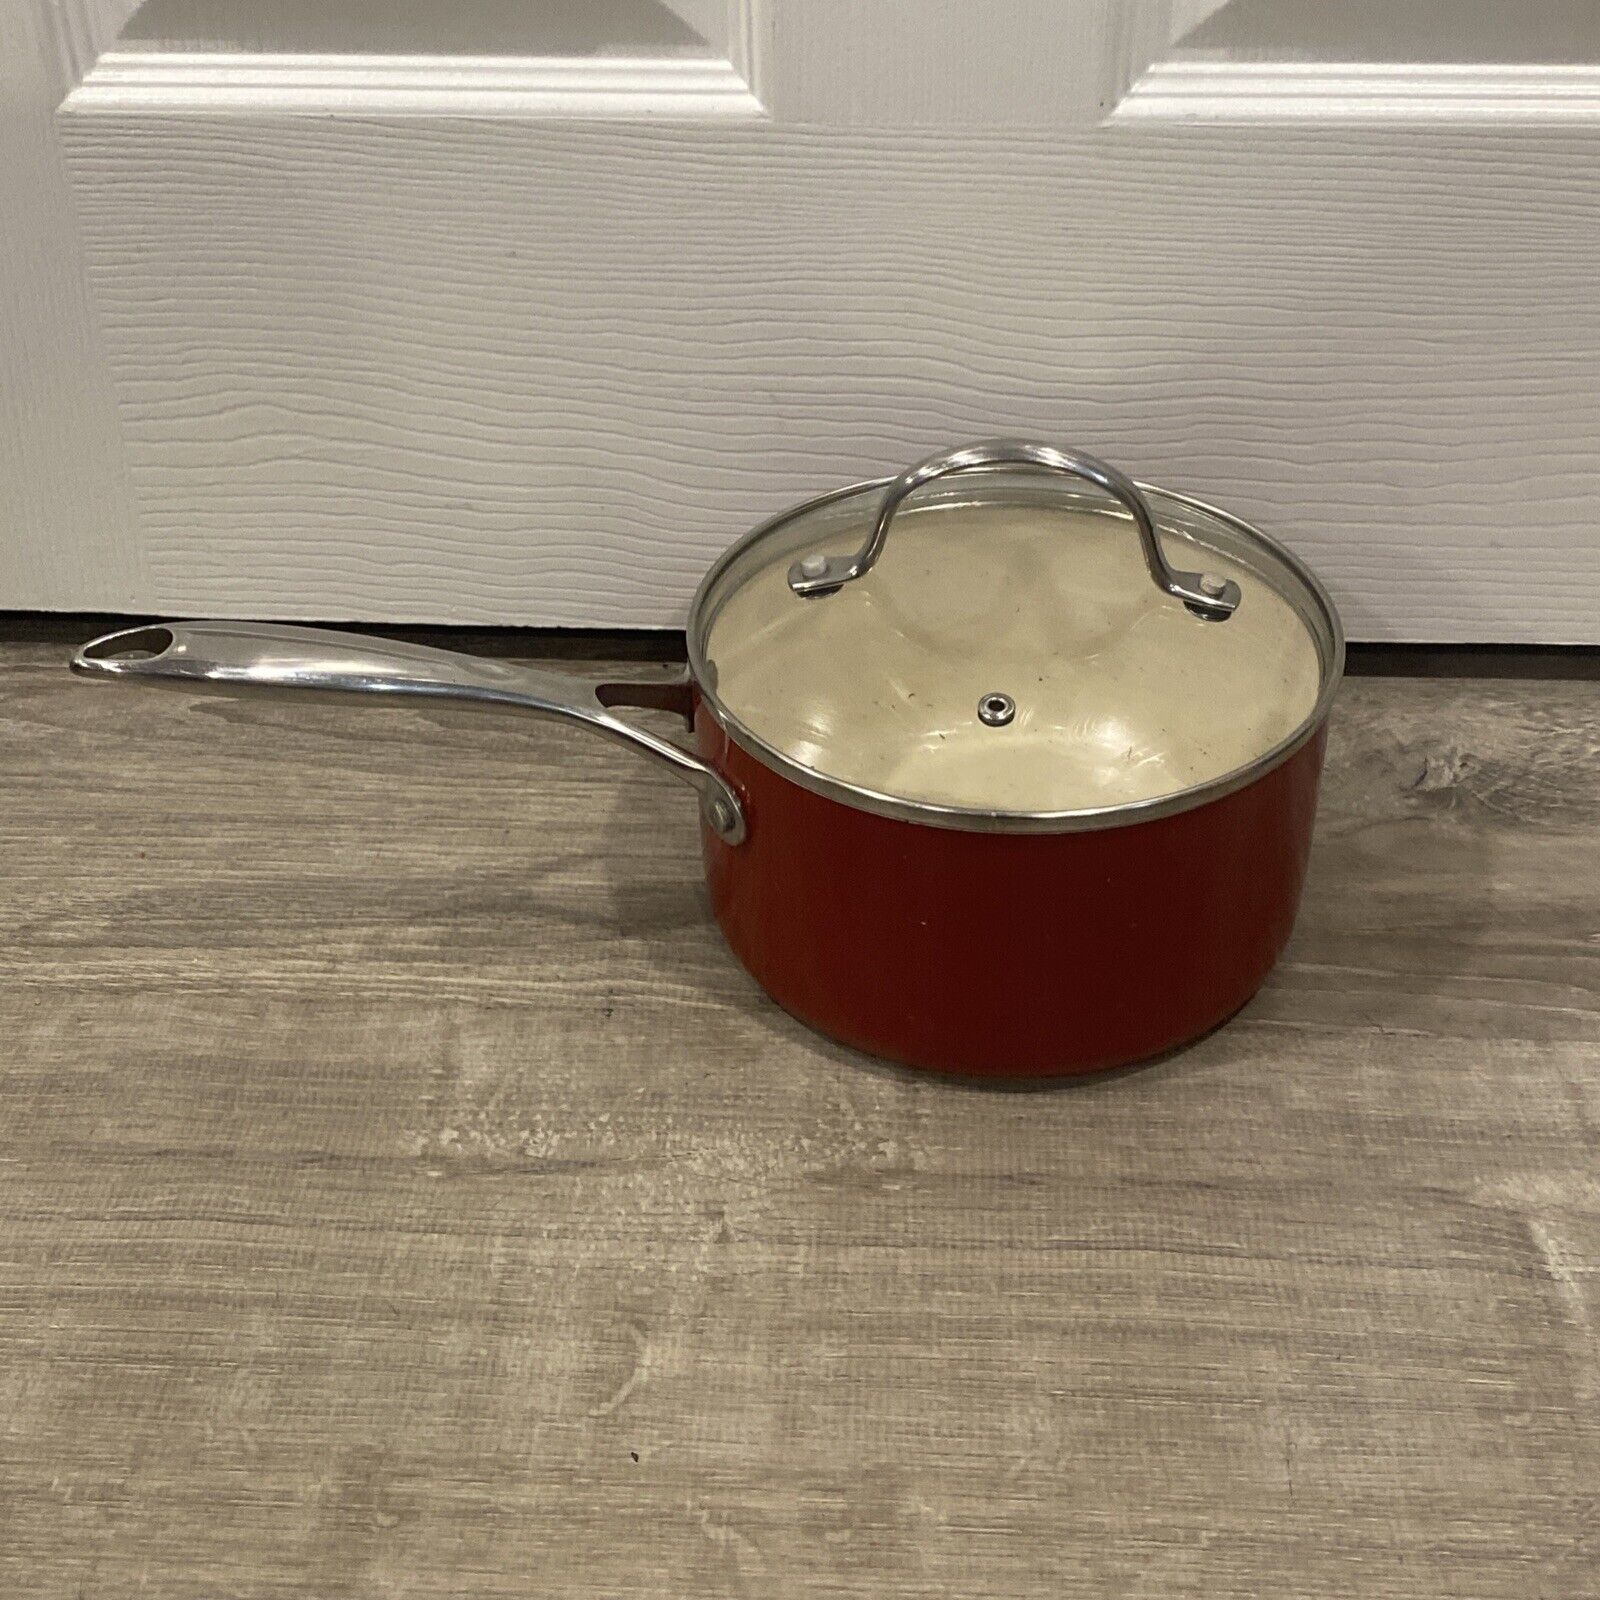 Food Network Red 2.5 Quart Covered Sauce Pan With Lid Cooking Pot